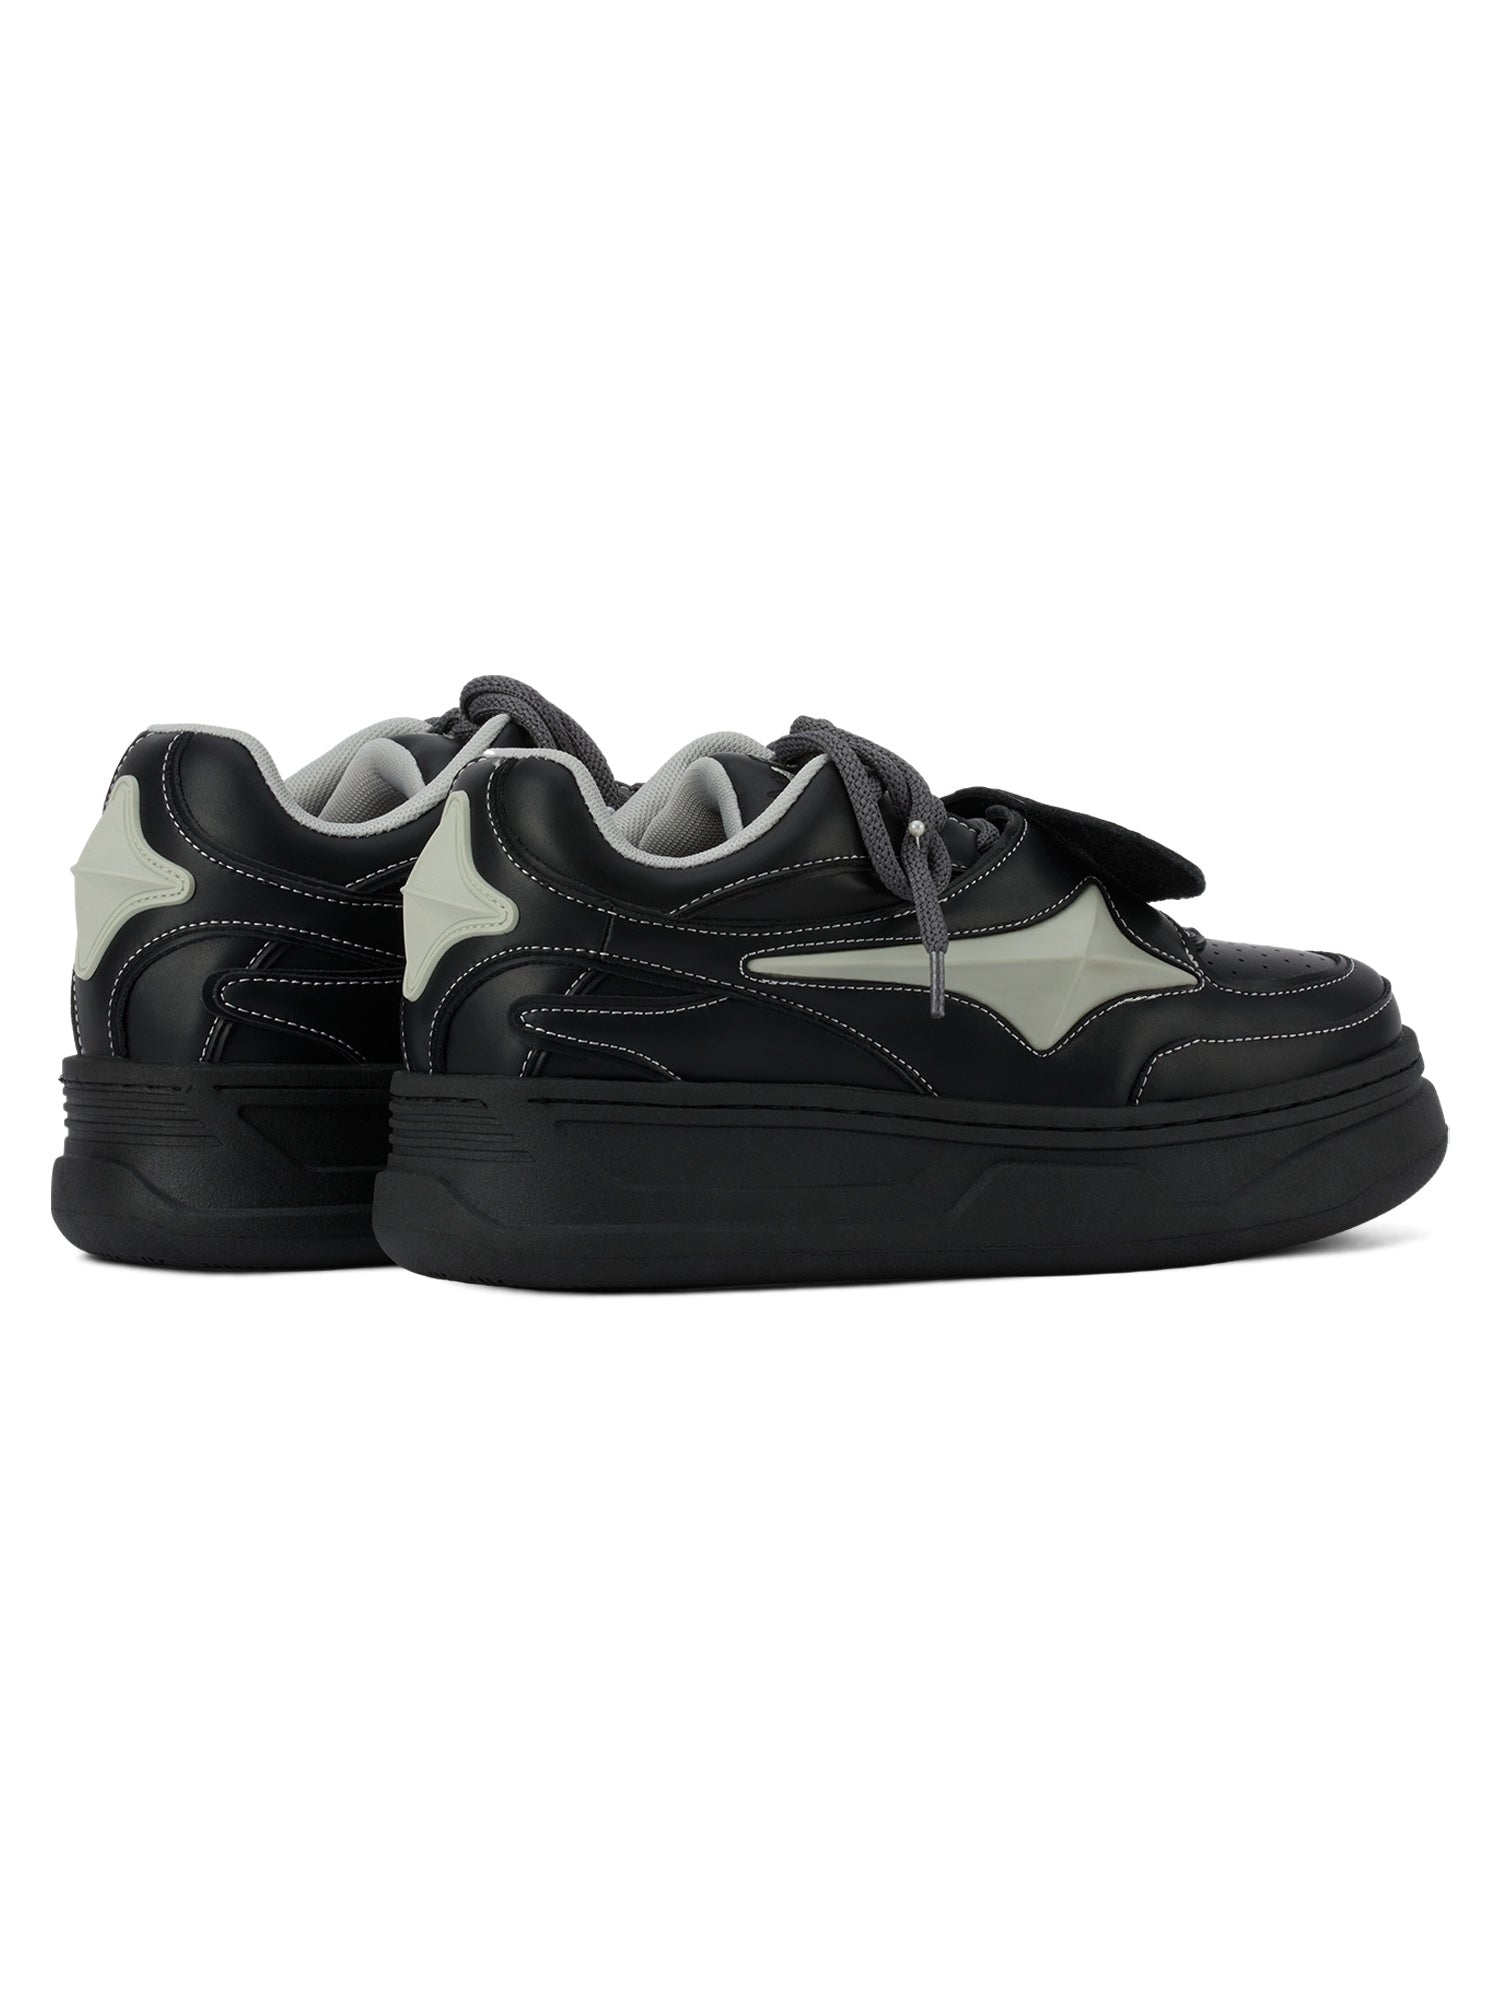 Thesupermade Couple Design Four Pointed Star Sneakers - 2038